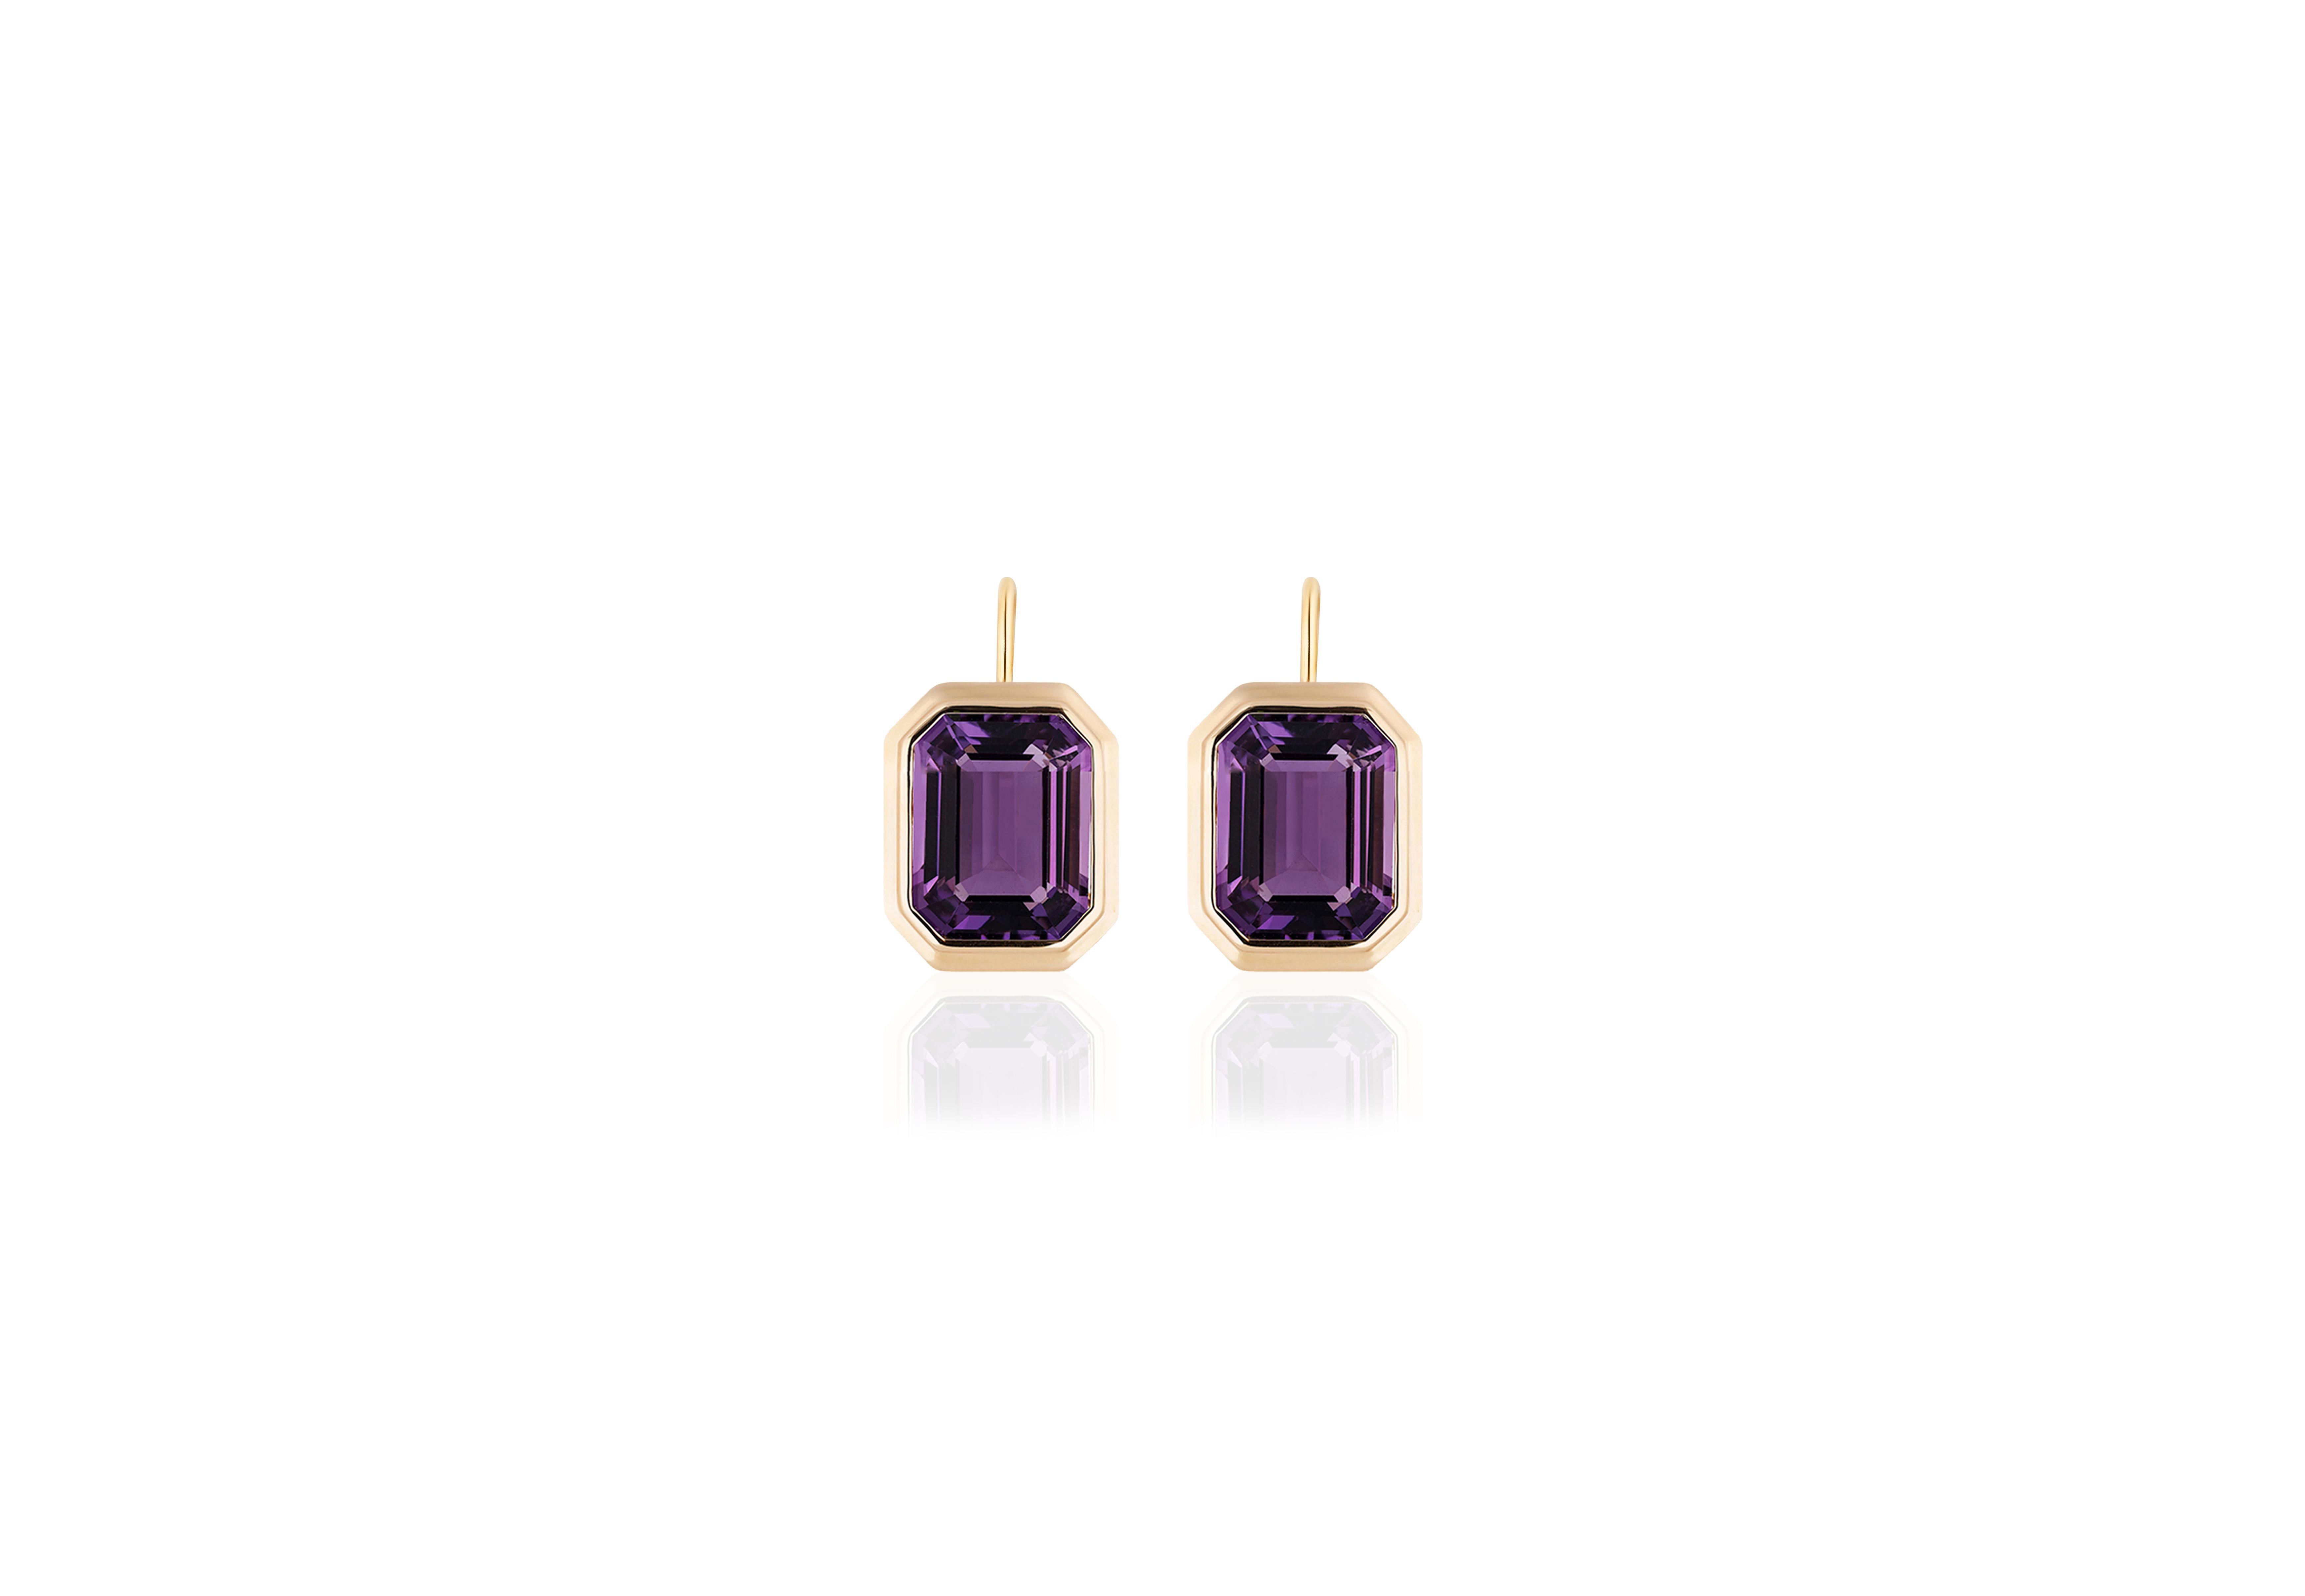 These Amethyst Emerald Cut Bezel Set Earrings on Wire in 18K Yellow Gold from the 'Manhattan Collection are a stunning and sophisticated jewelry piece. These earrings feature exquisite amethyst gemstones with an elegant emerald cut, cradled in a